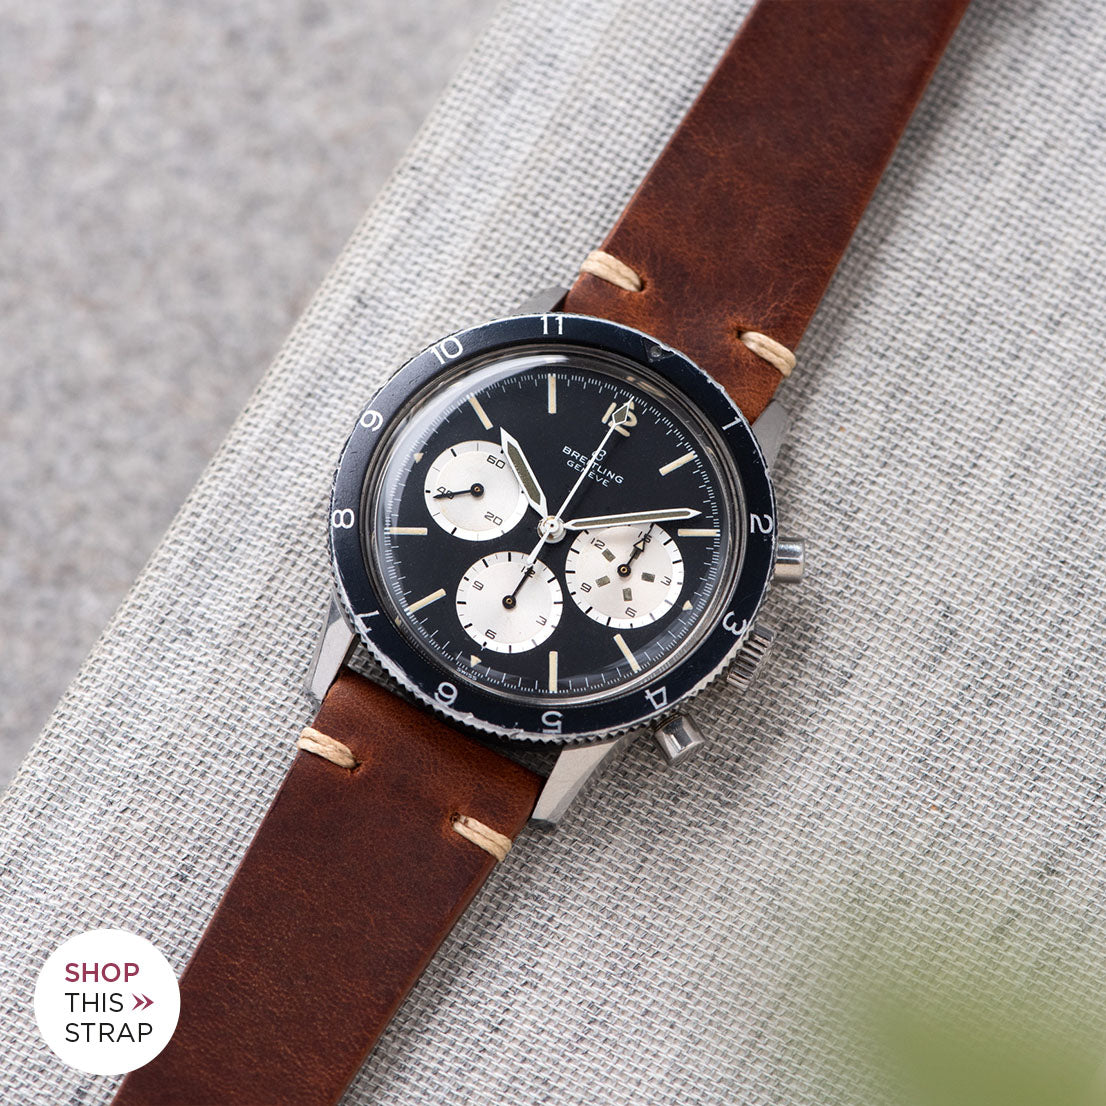 Bulang and Sons_Strap Guide_The Breitling Co-Pilot 7650 Chronograph_Siena Brown Leather Watch Strap